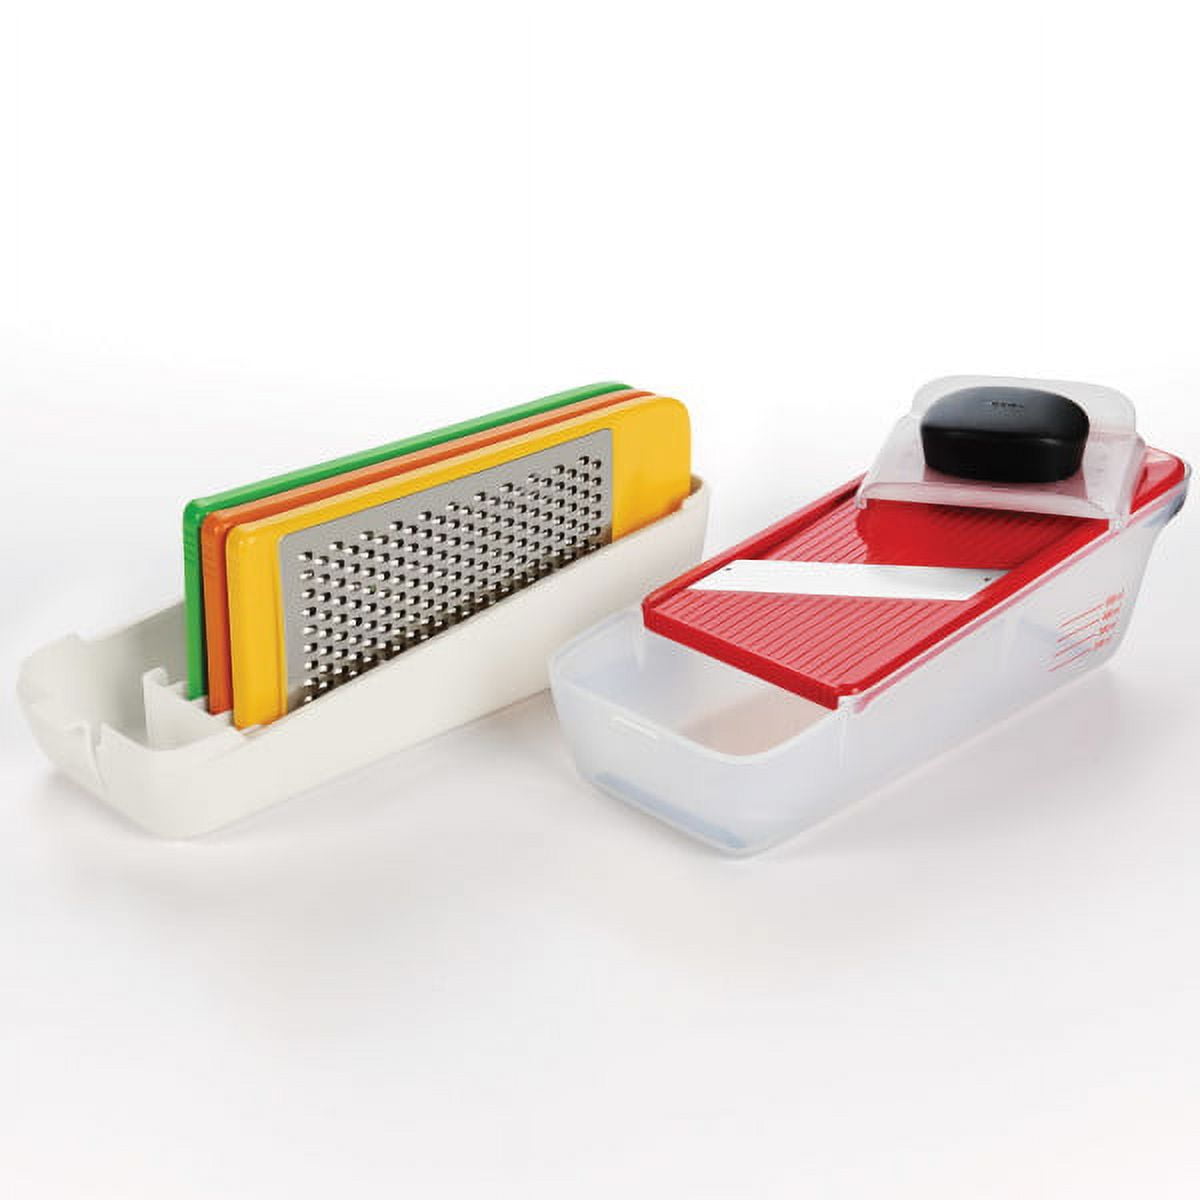 Saturday Love: Oxo Good Grips Grate and Slice Set - 3 Scoops of Sugar